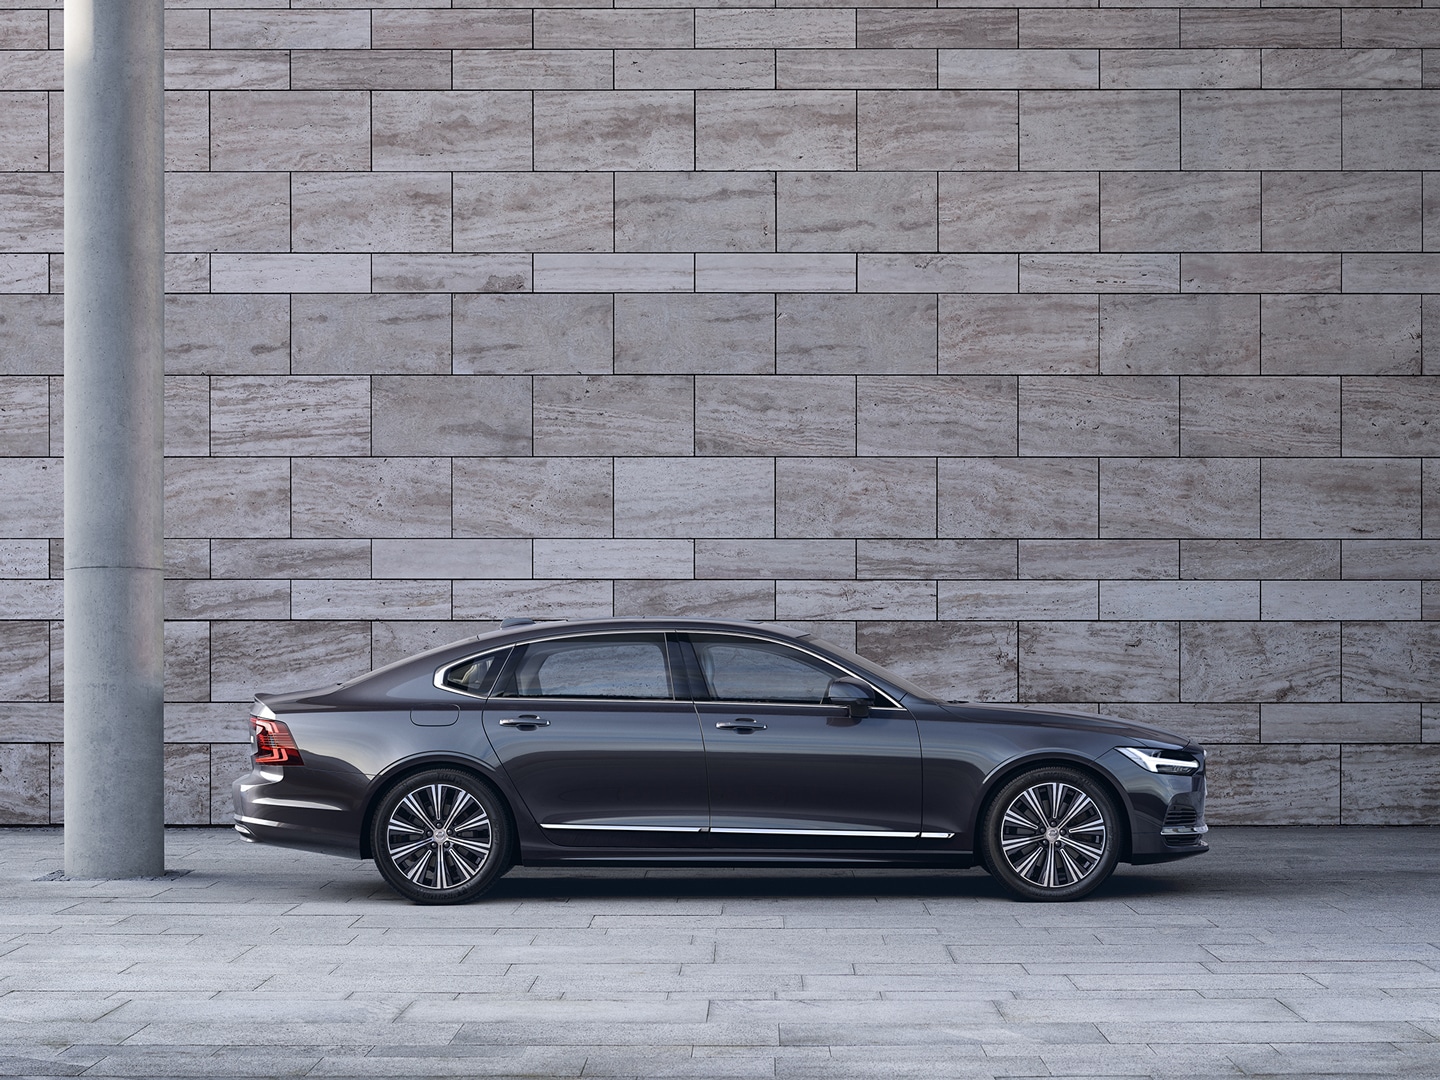 Volvo S90 seen from side parked in front of grey concrete wall.